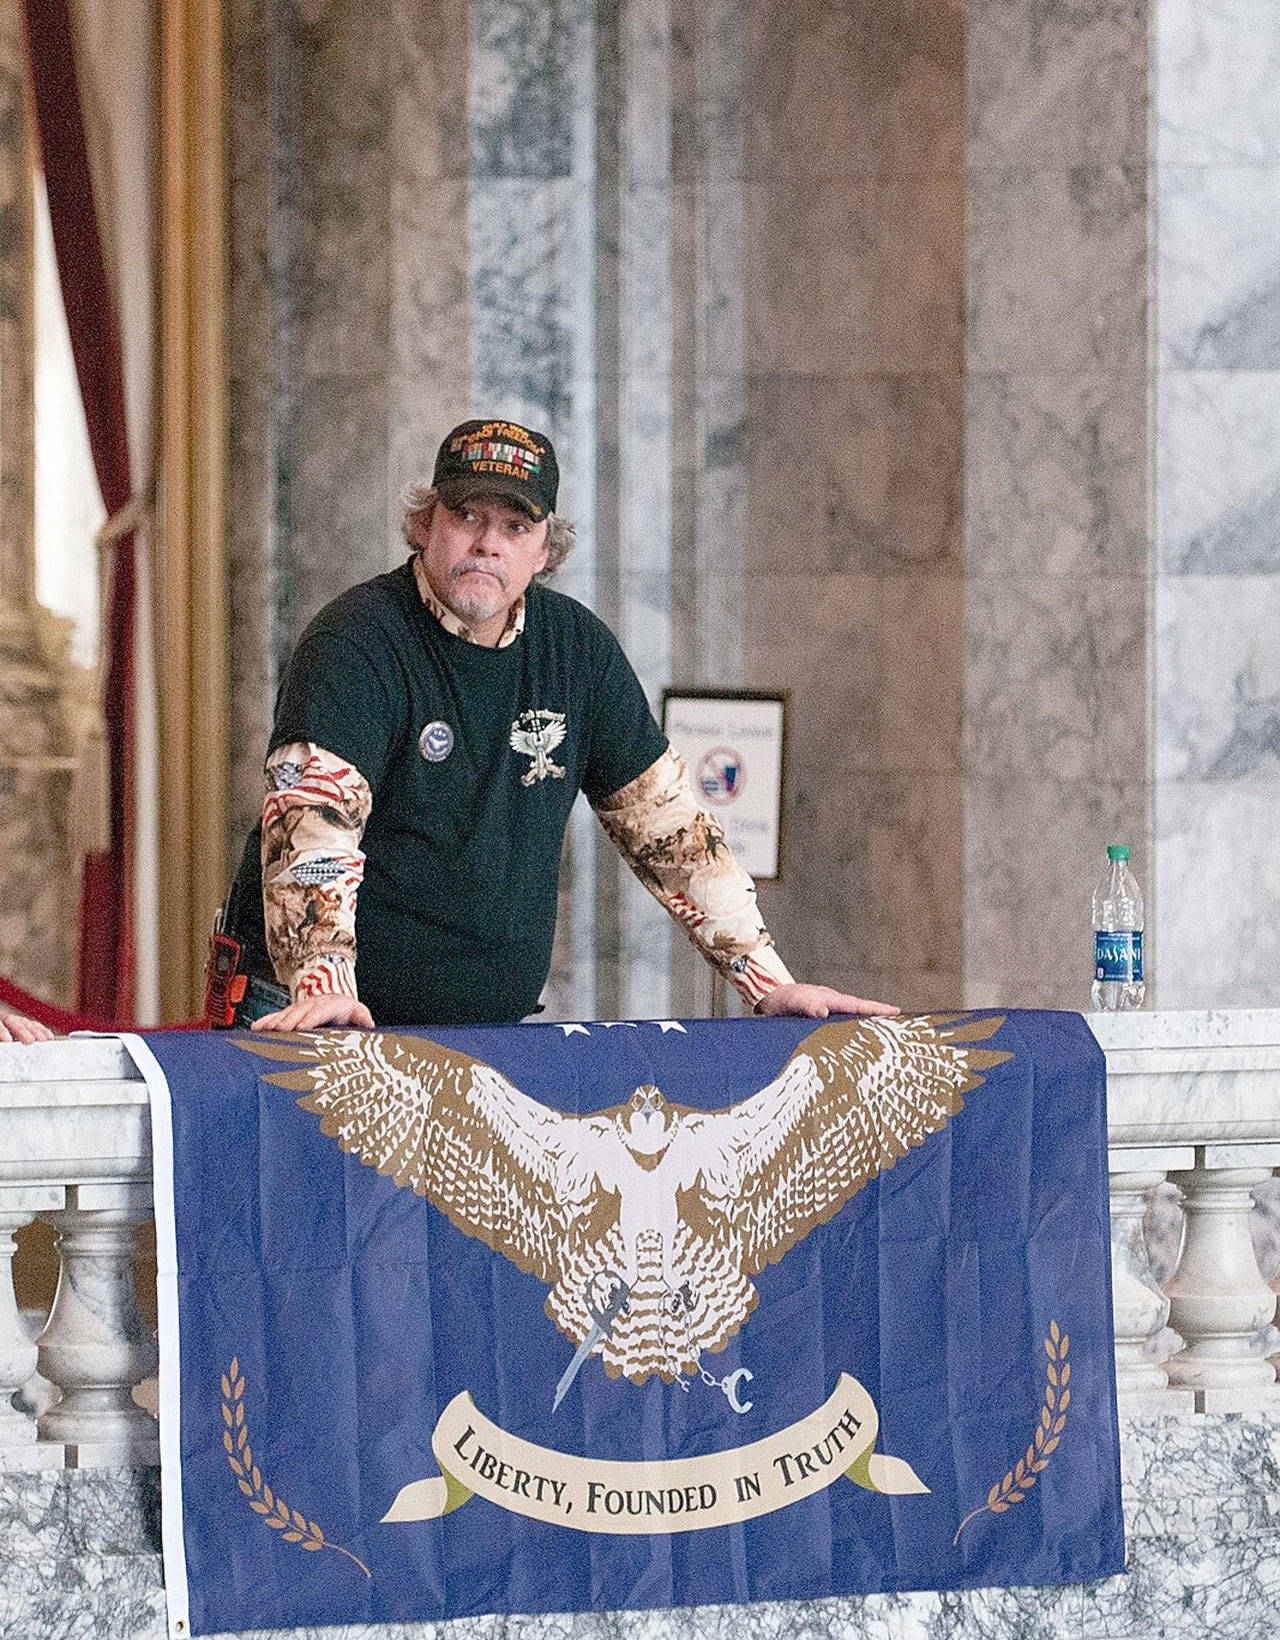 Robert Brown, an advocate for splitting Washington into two states, stands over a flag at a rally Feb. 15 at the Capitol in Olympia. — Photo by Sean Harding, Washington Newspaper Publishers Association